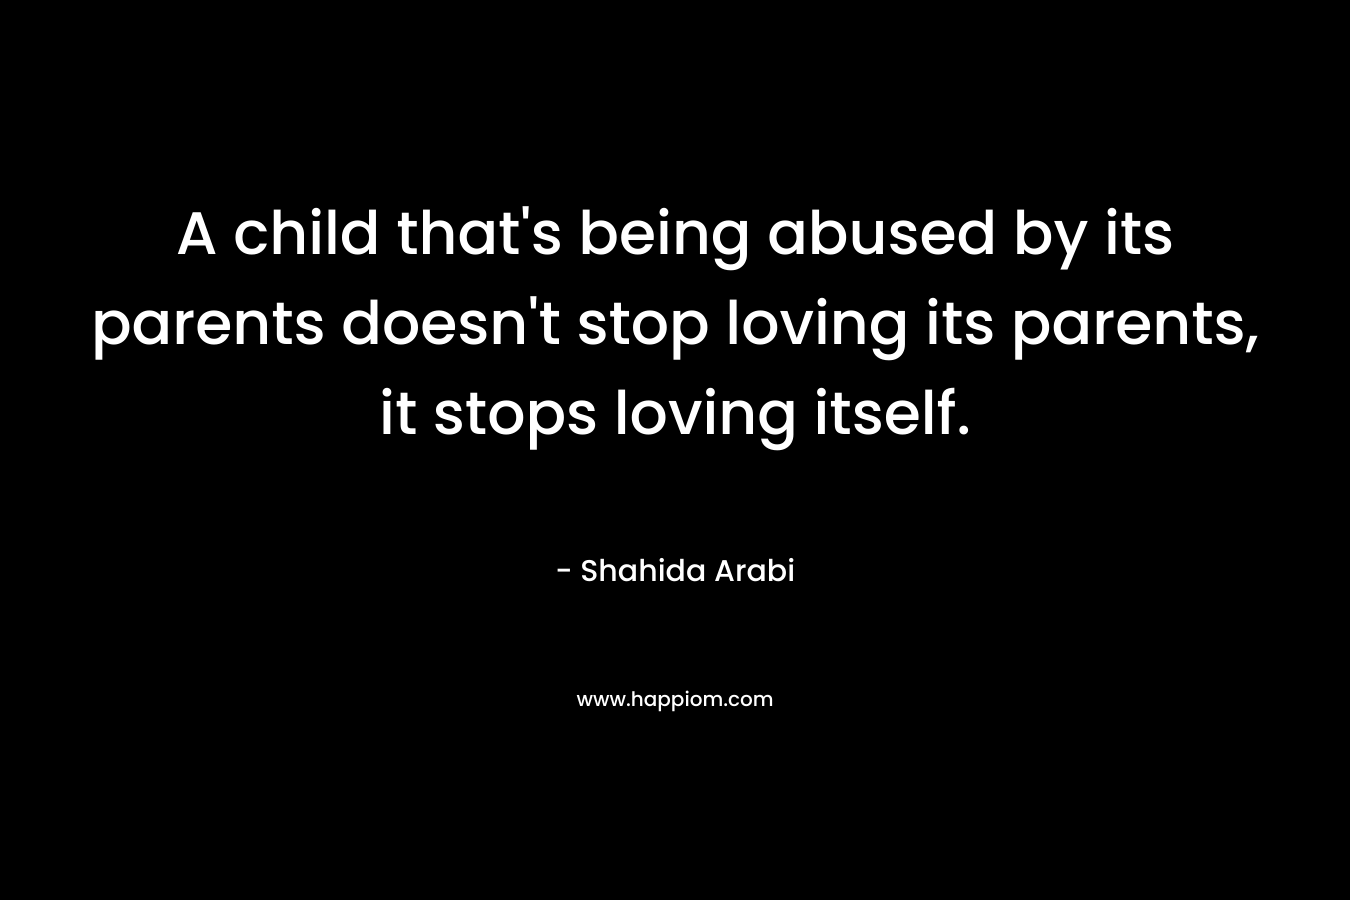 A child that’s being abused by its parents doesn’t stop loving its parents, it stops loving itself. – Shahida Arabi